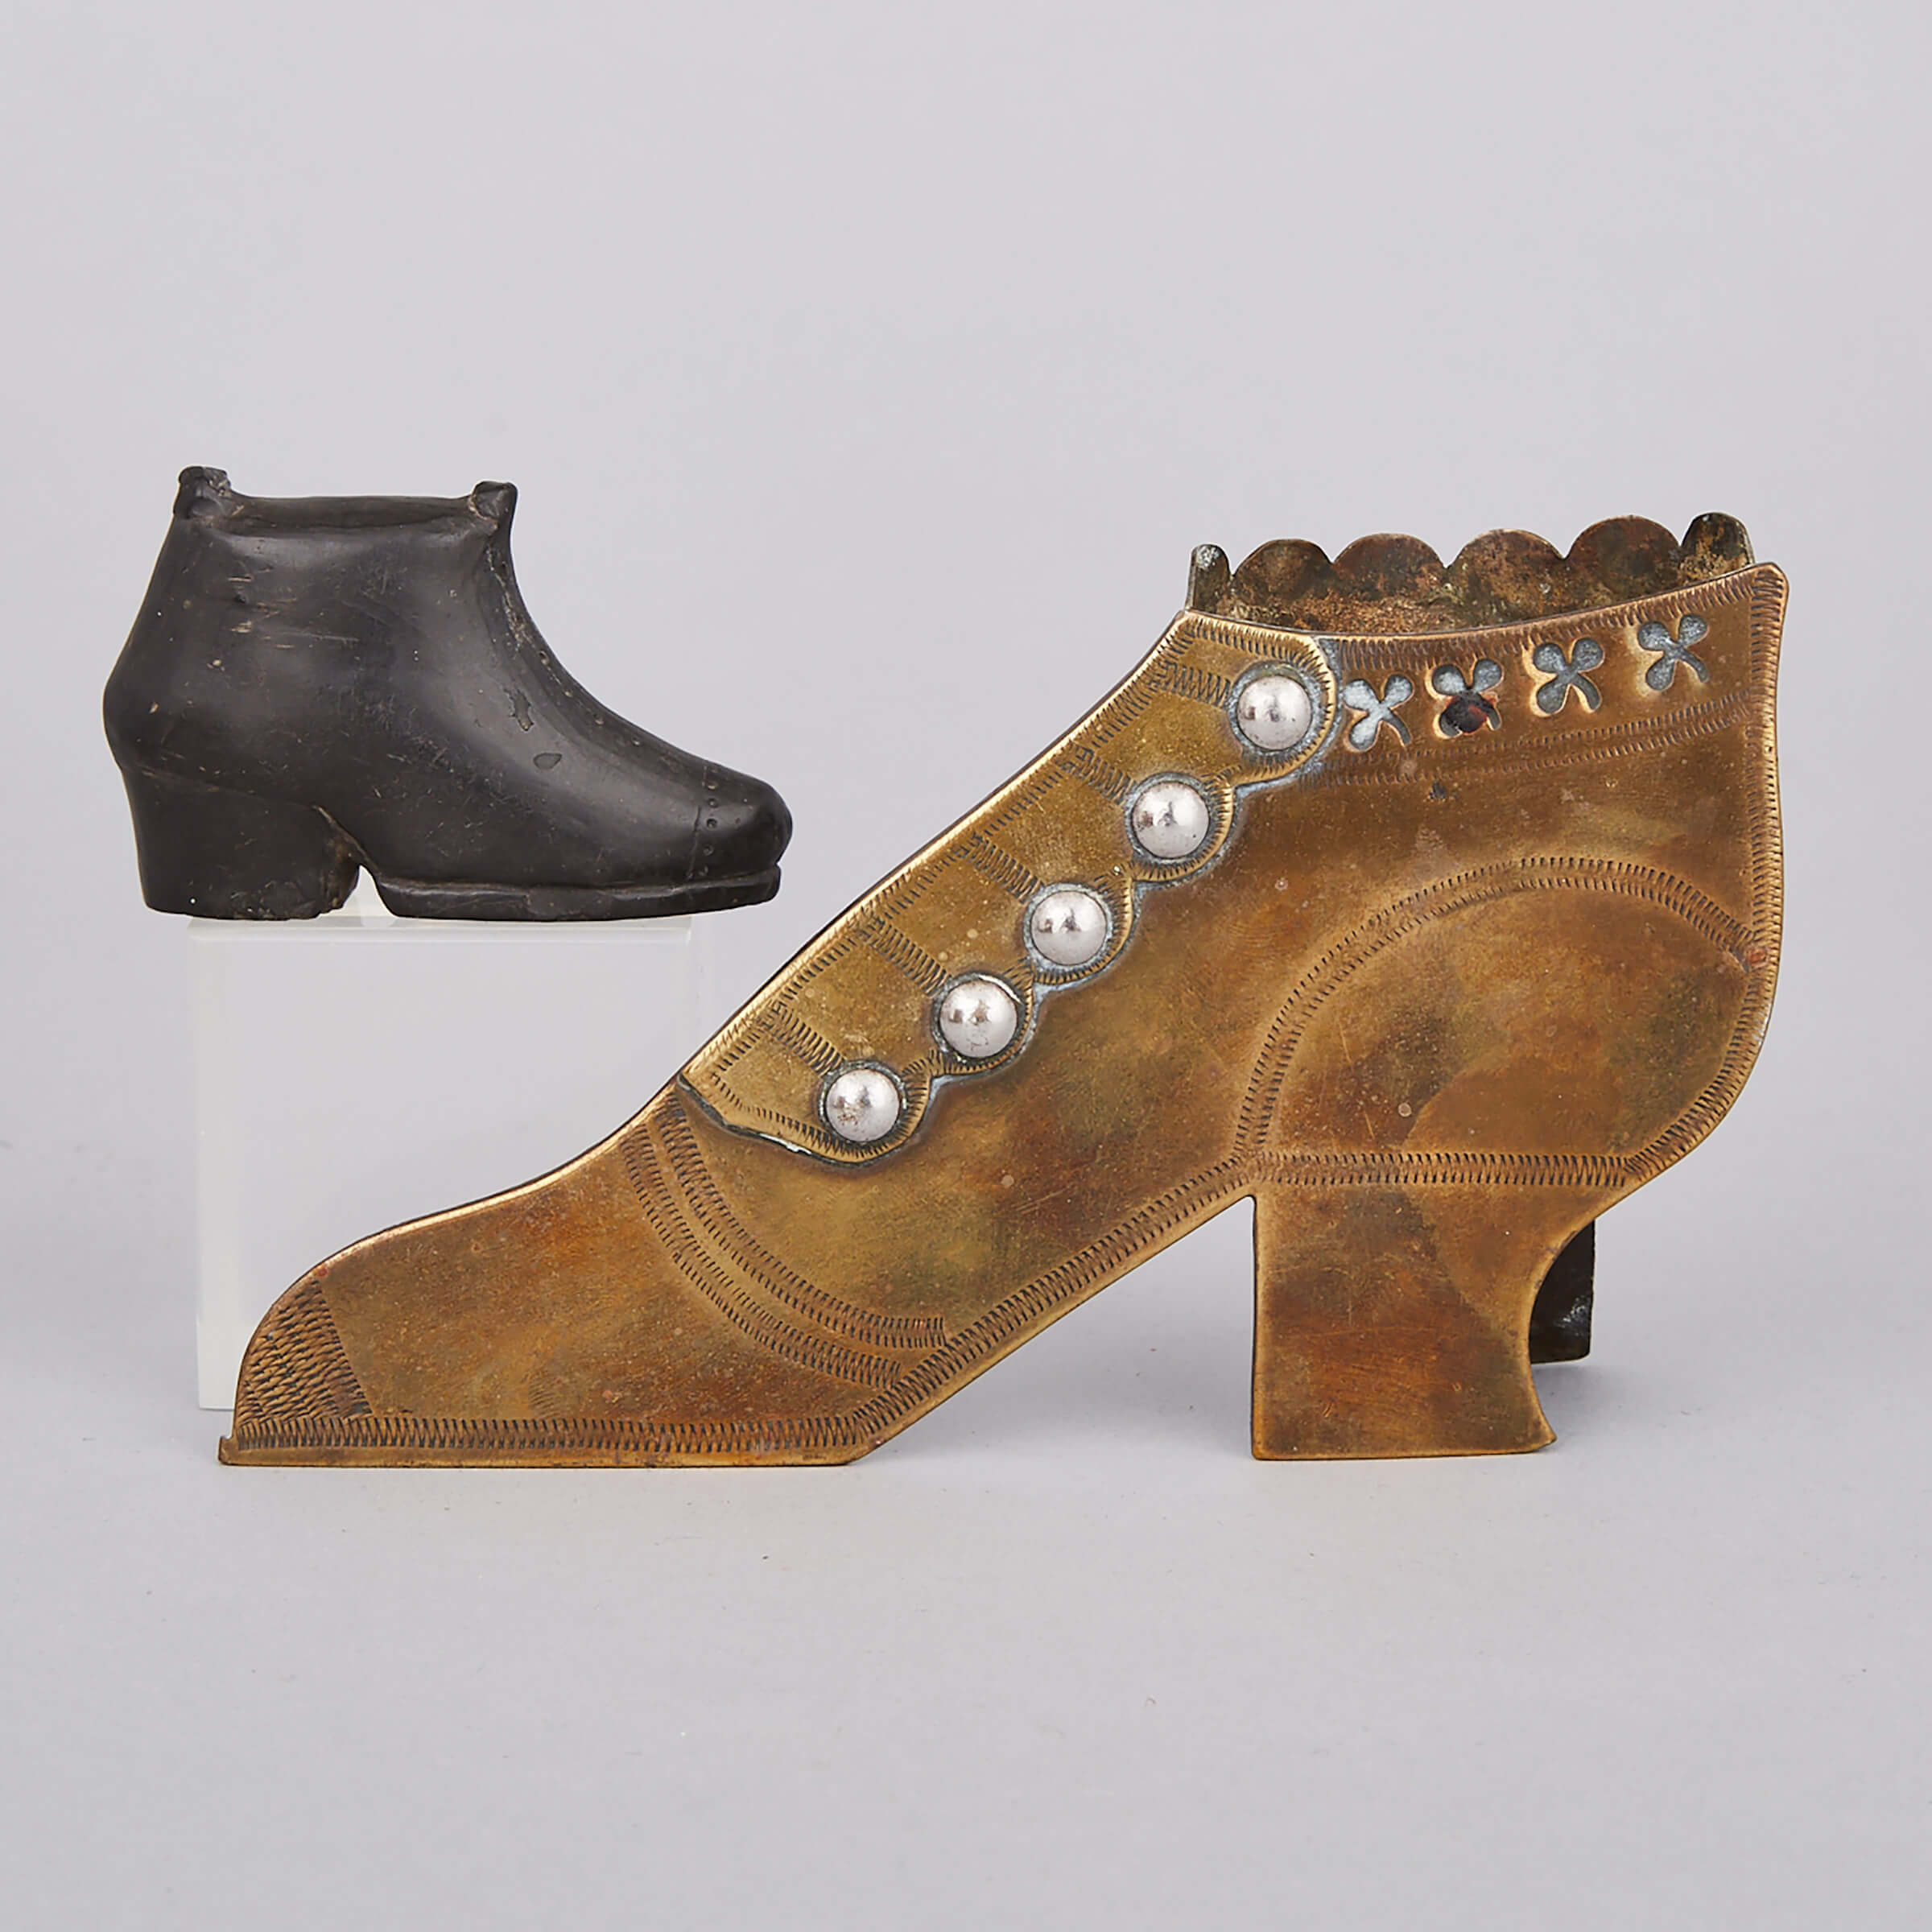 Two Victorian Shoe Form Decorations, 19th century